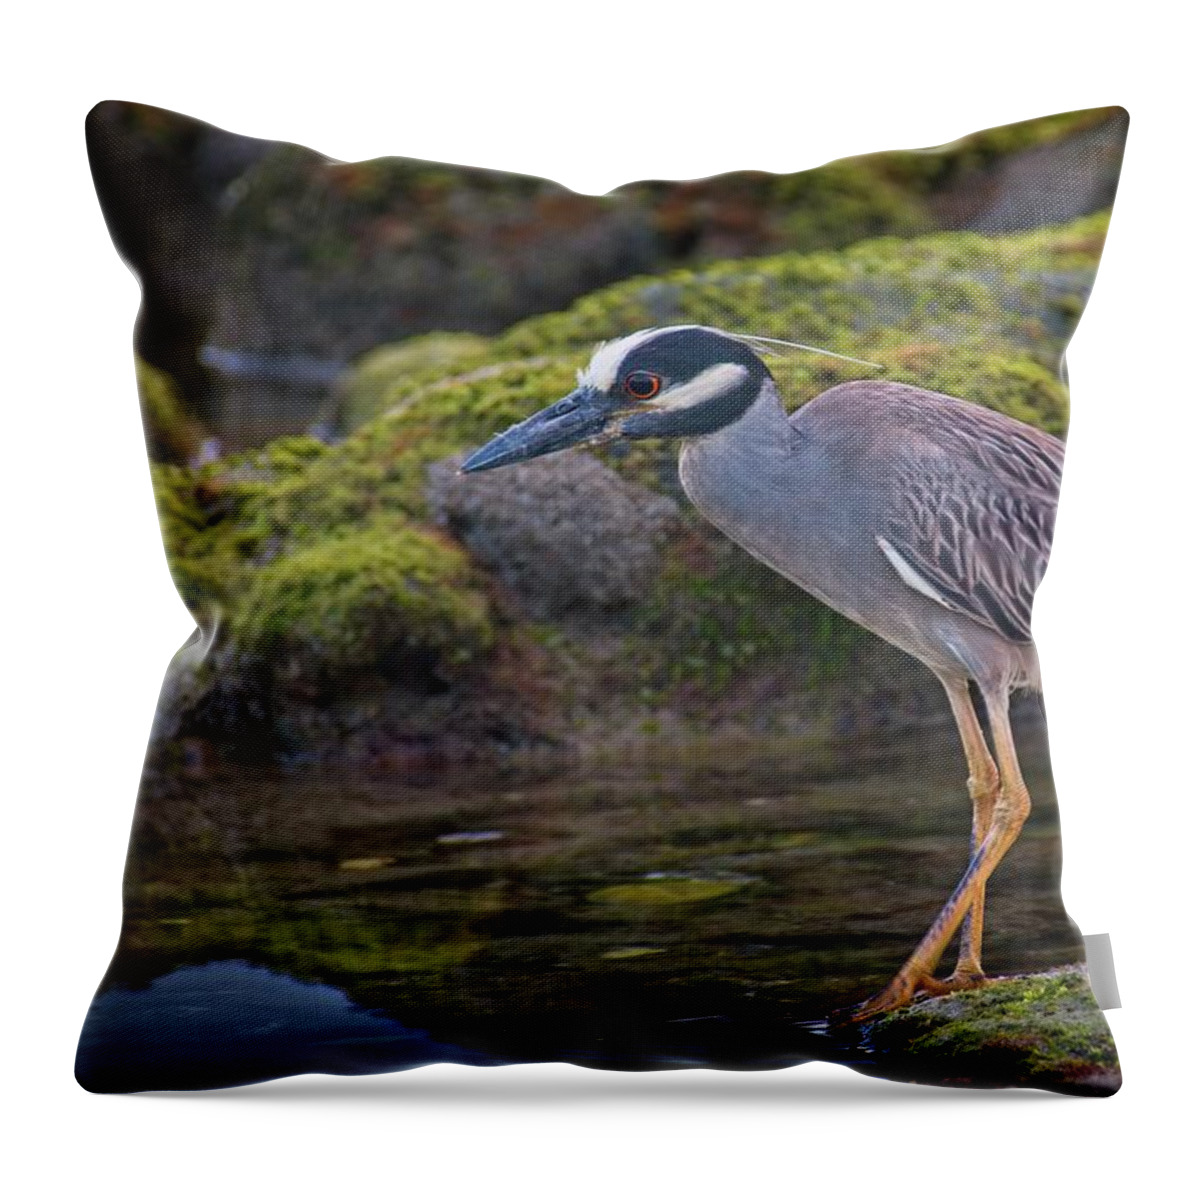 Coral Cove Throw Pillow featuring the photograph Yellow-crowned Night Heron by Steve DaPonte